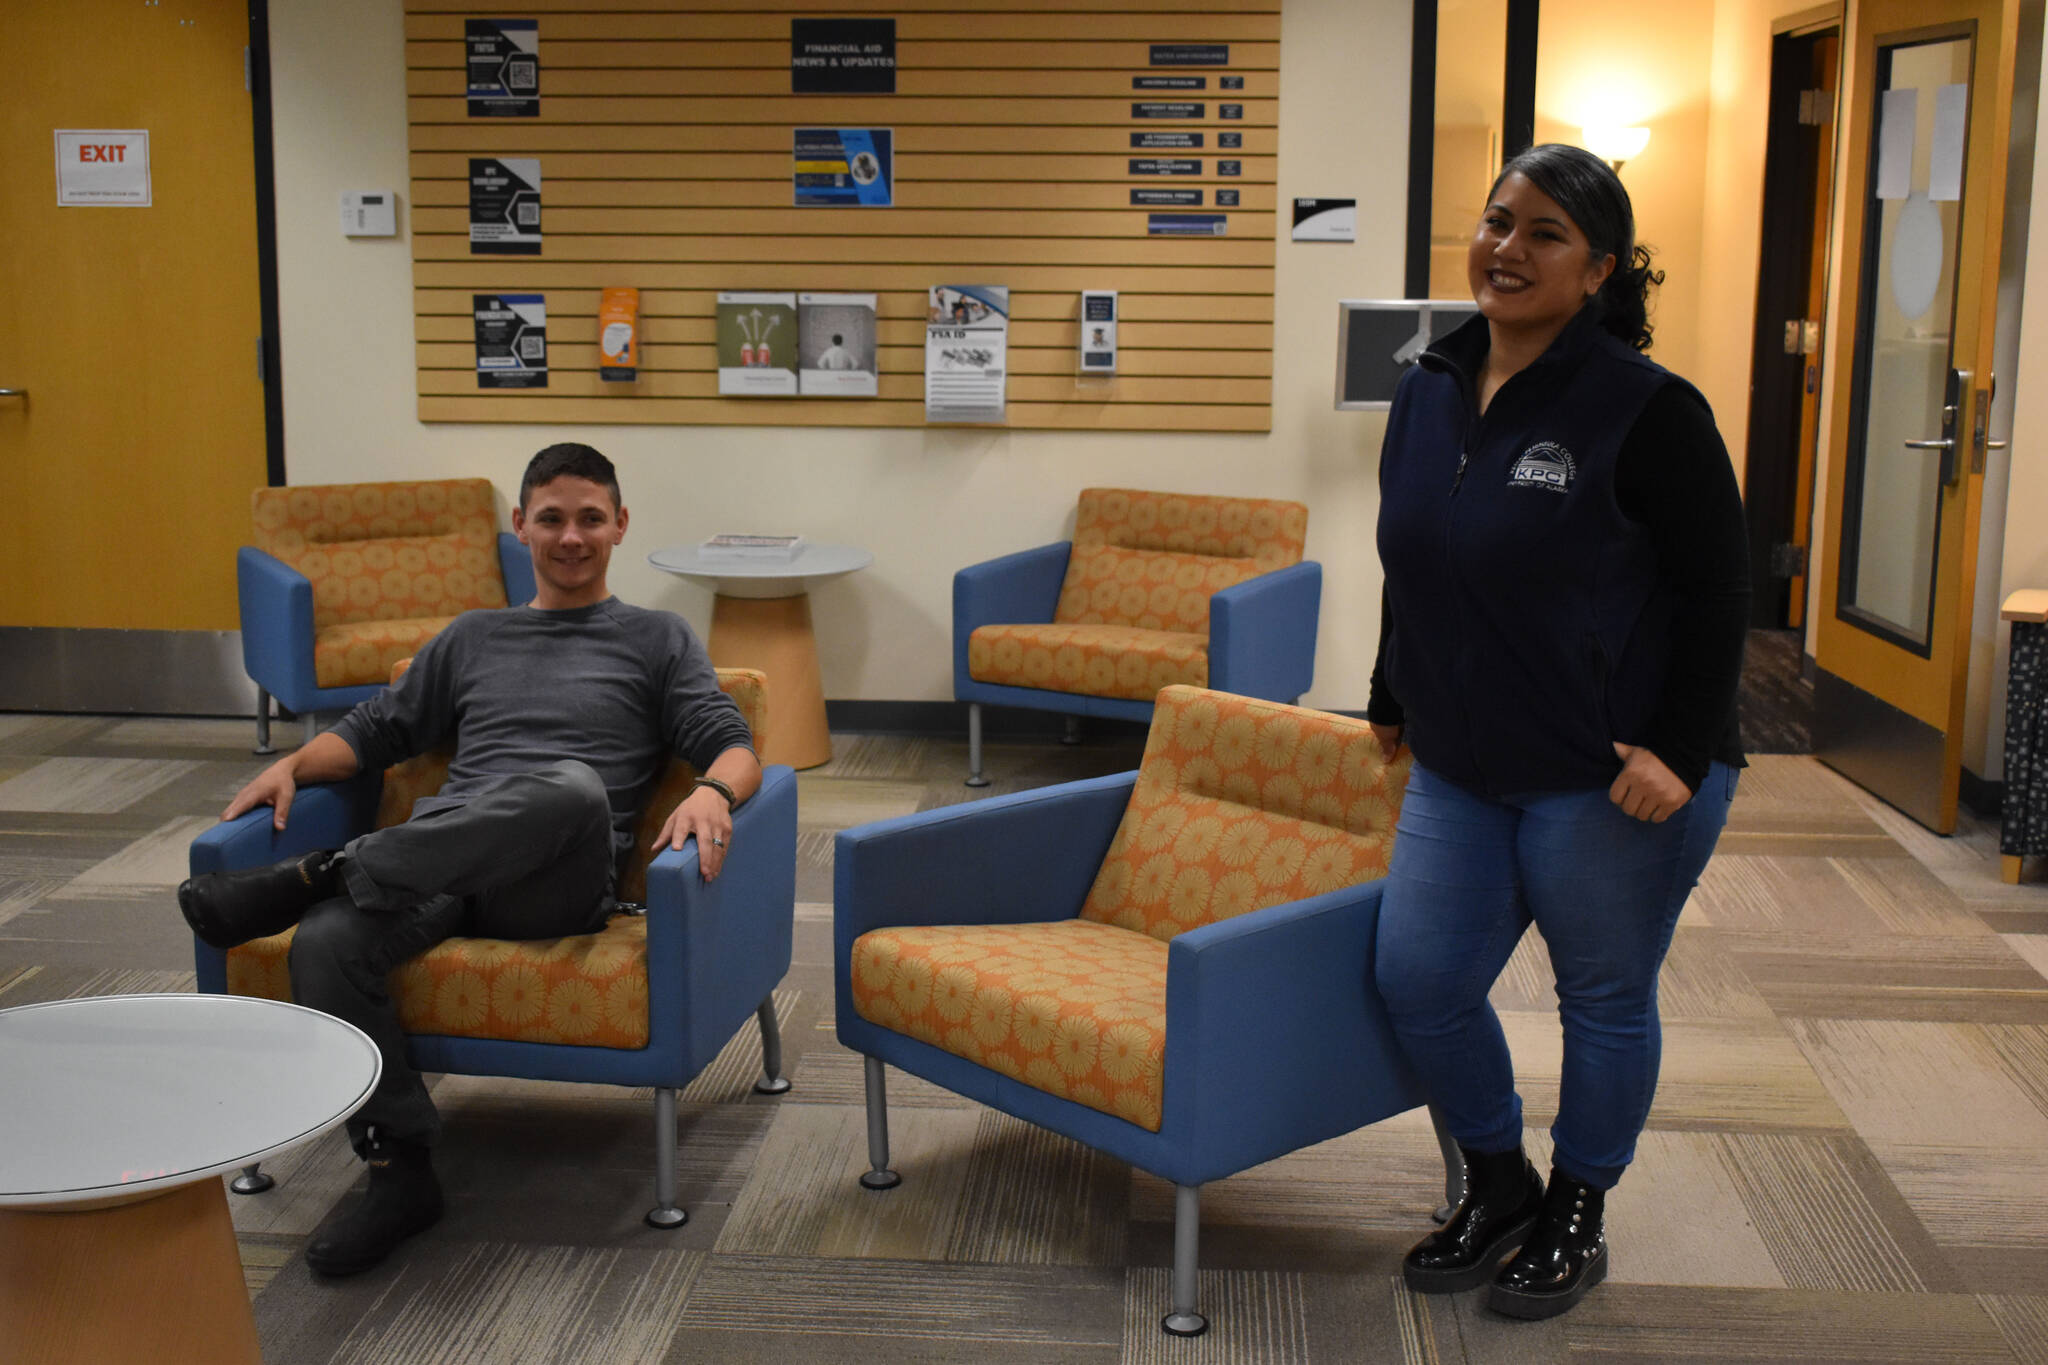 Alex LeClair and a representative of the KPC Financial Aid Office in the Kenai Peninsula College Student Services Office on Aug. 18, 2022 in Soldotna, Alaska. (Jake Dye/Peninsula Clarion)